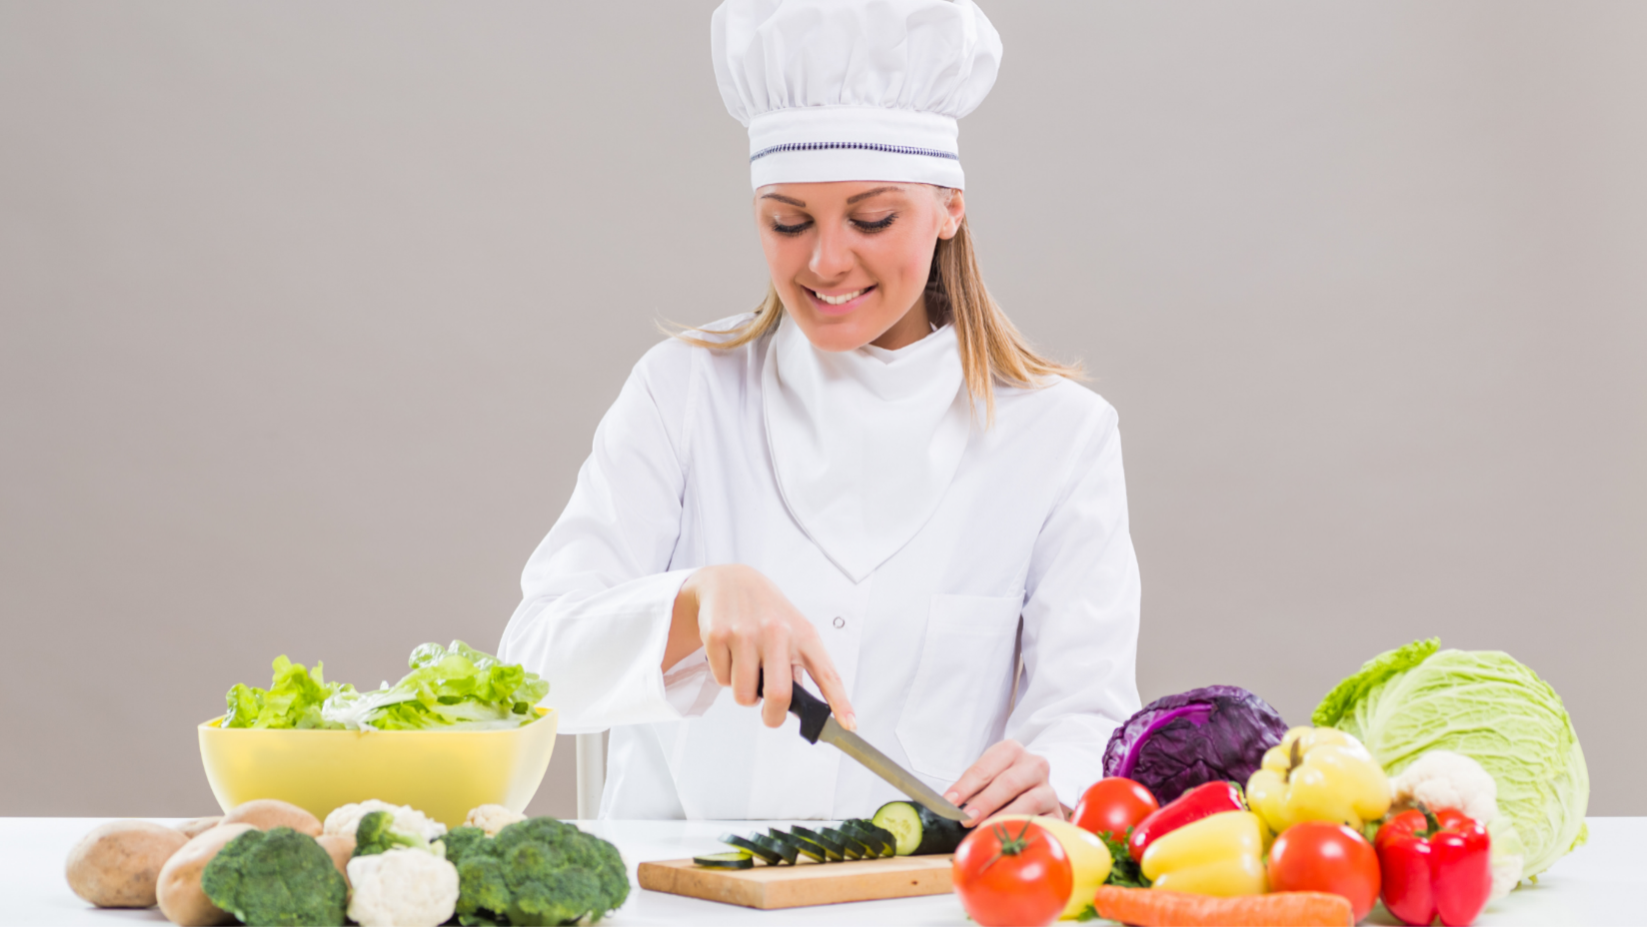 best personal chef catering services in Tampa